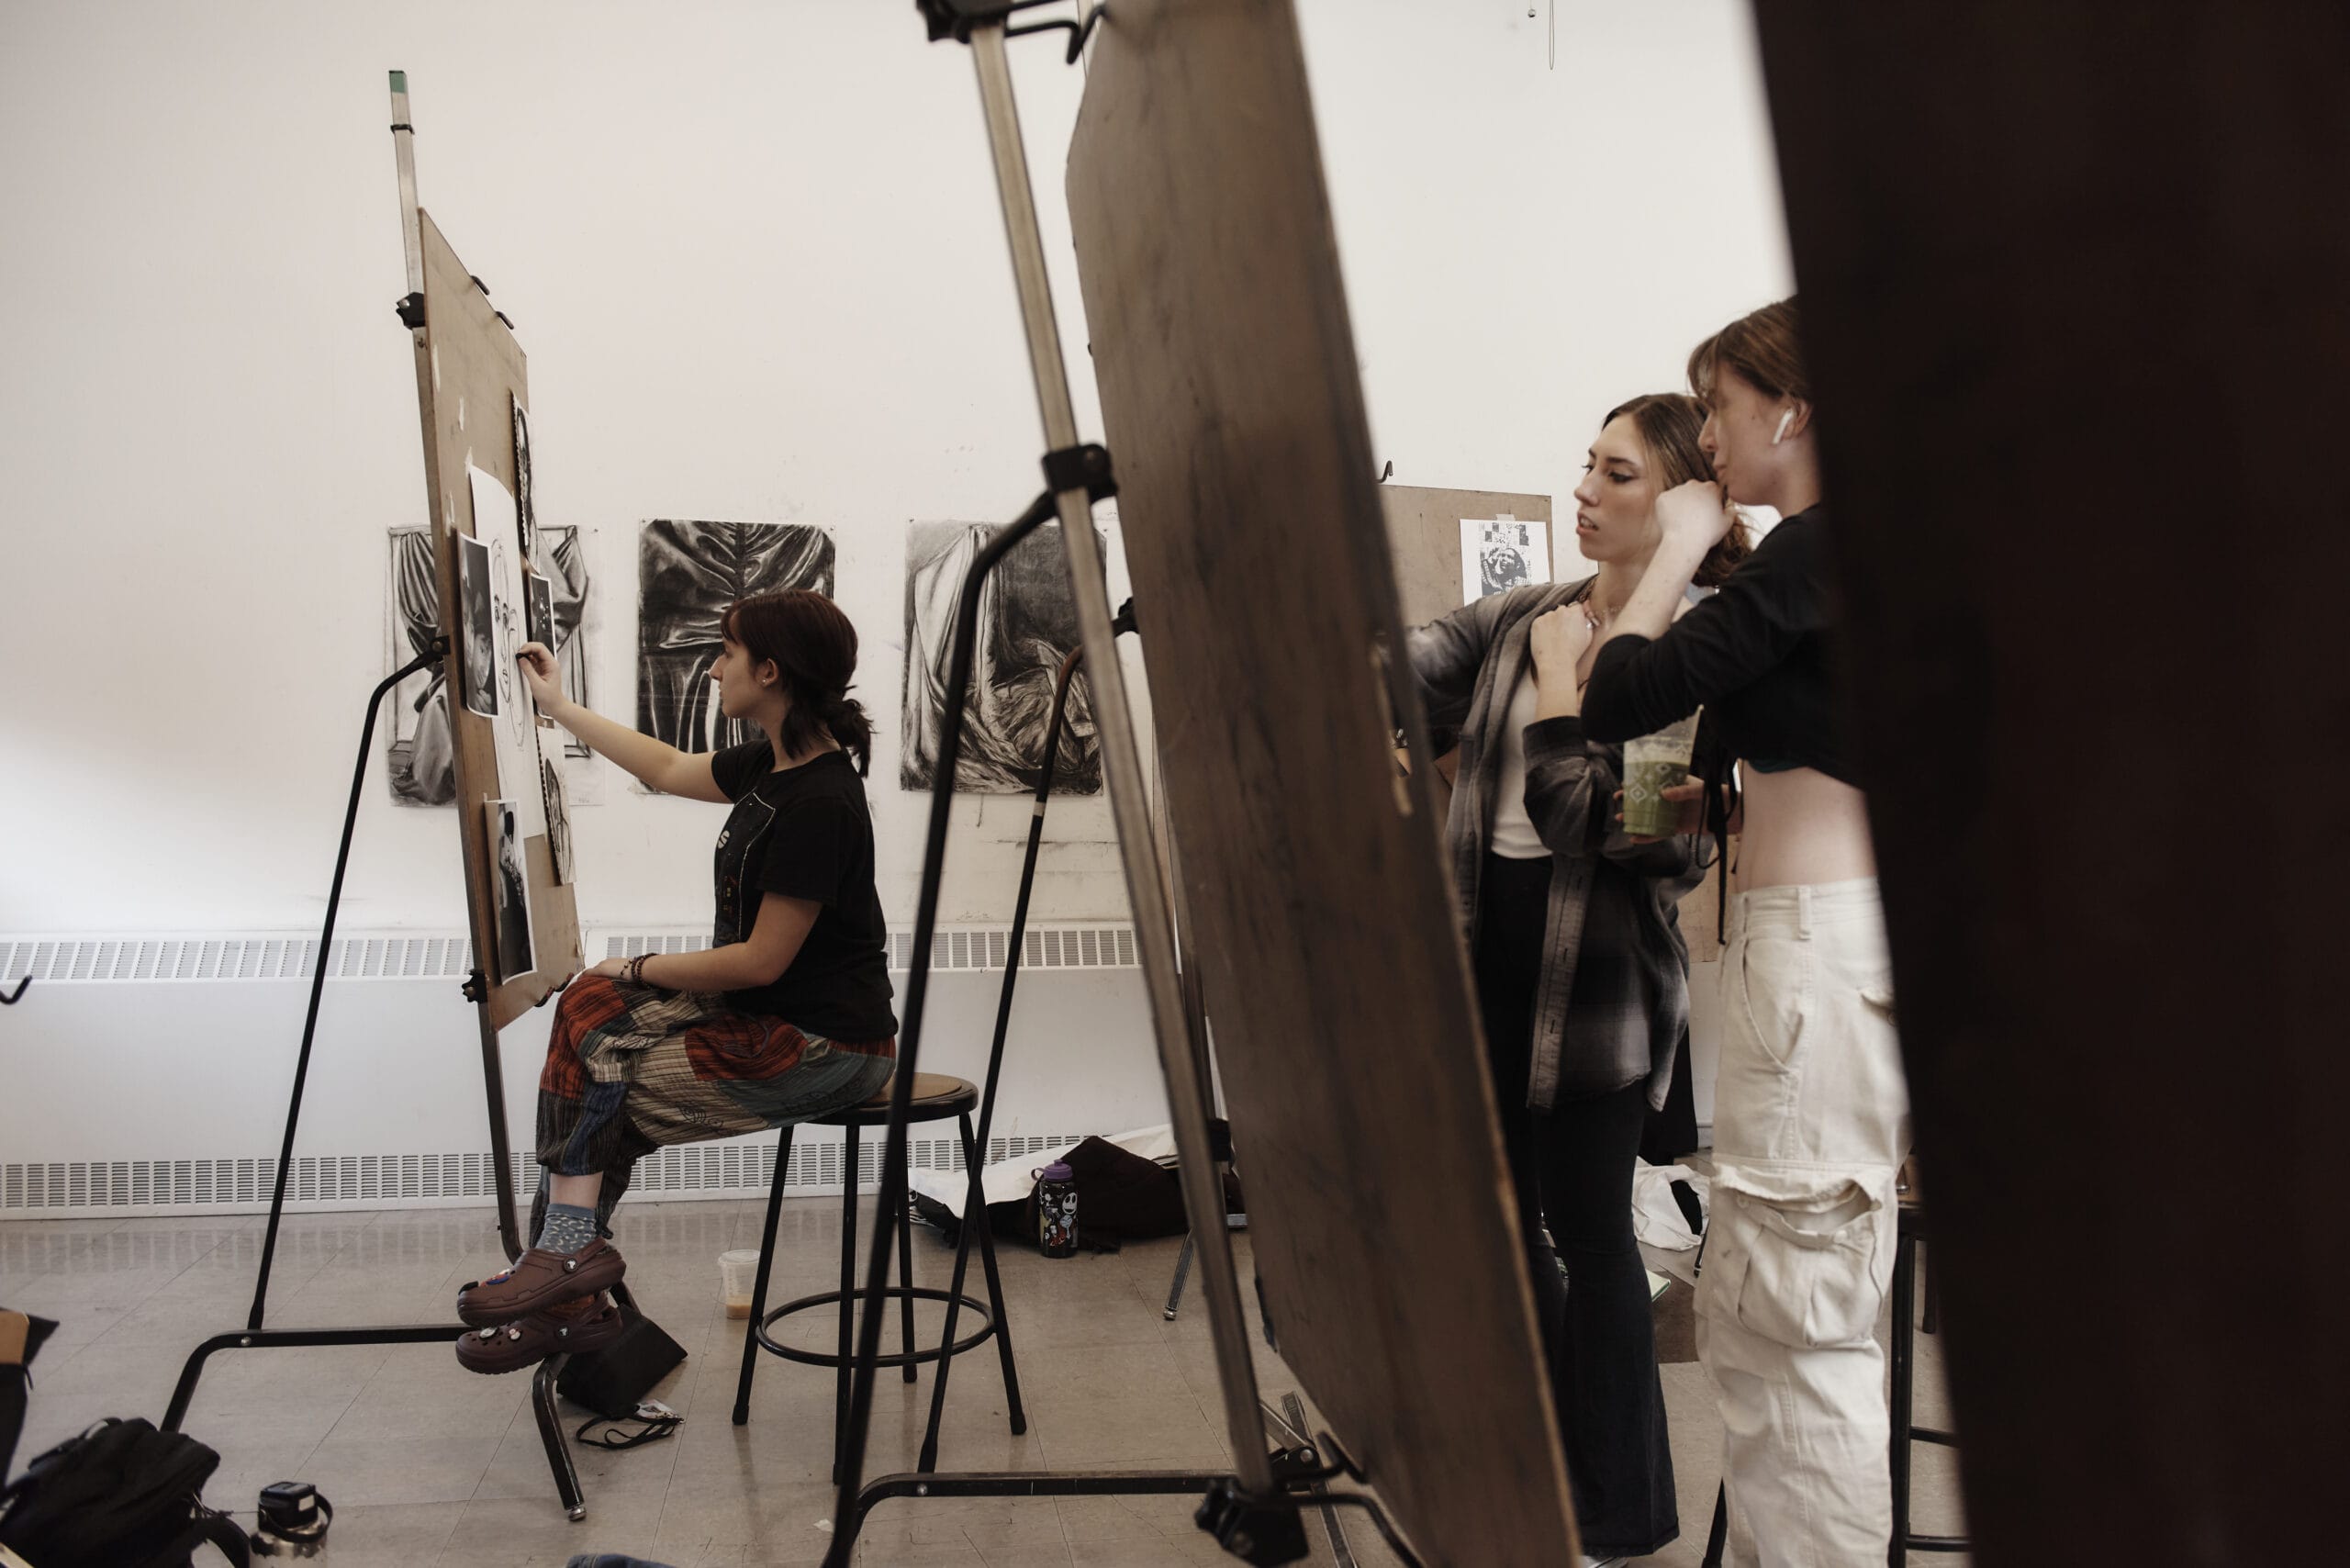 Students stand at easels drawing with charcoal.